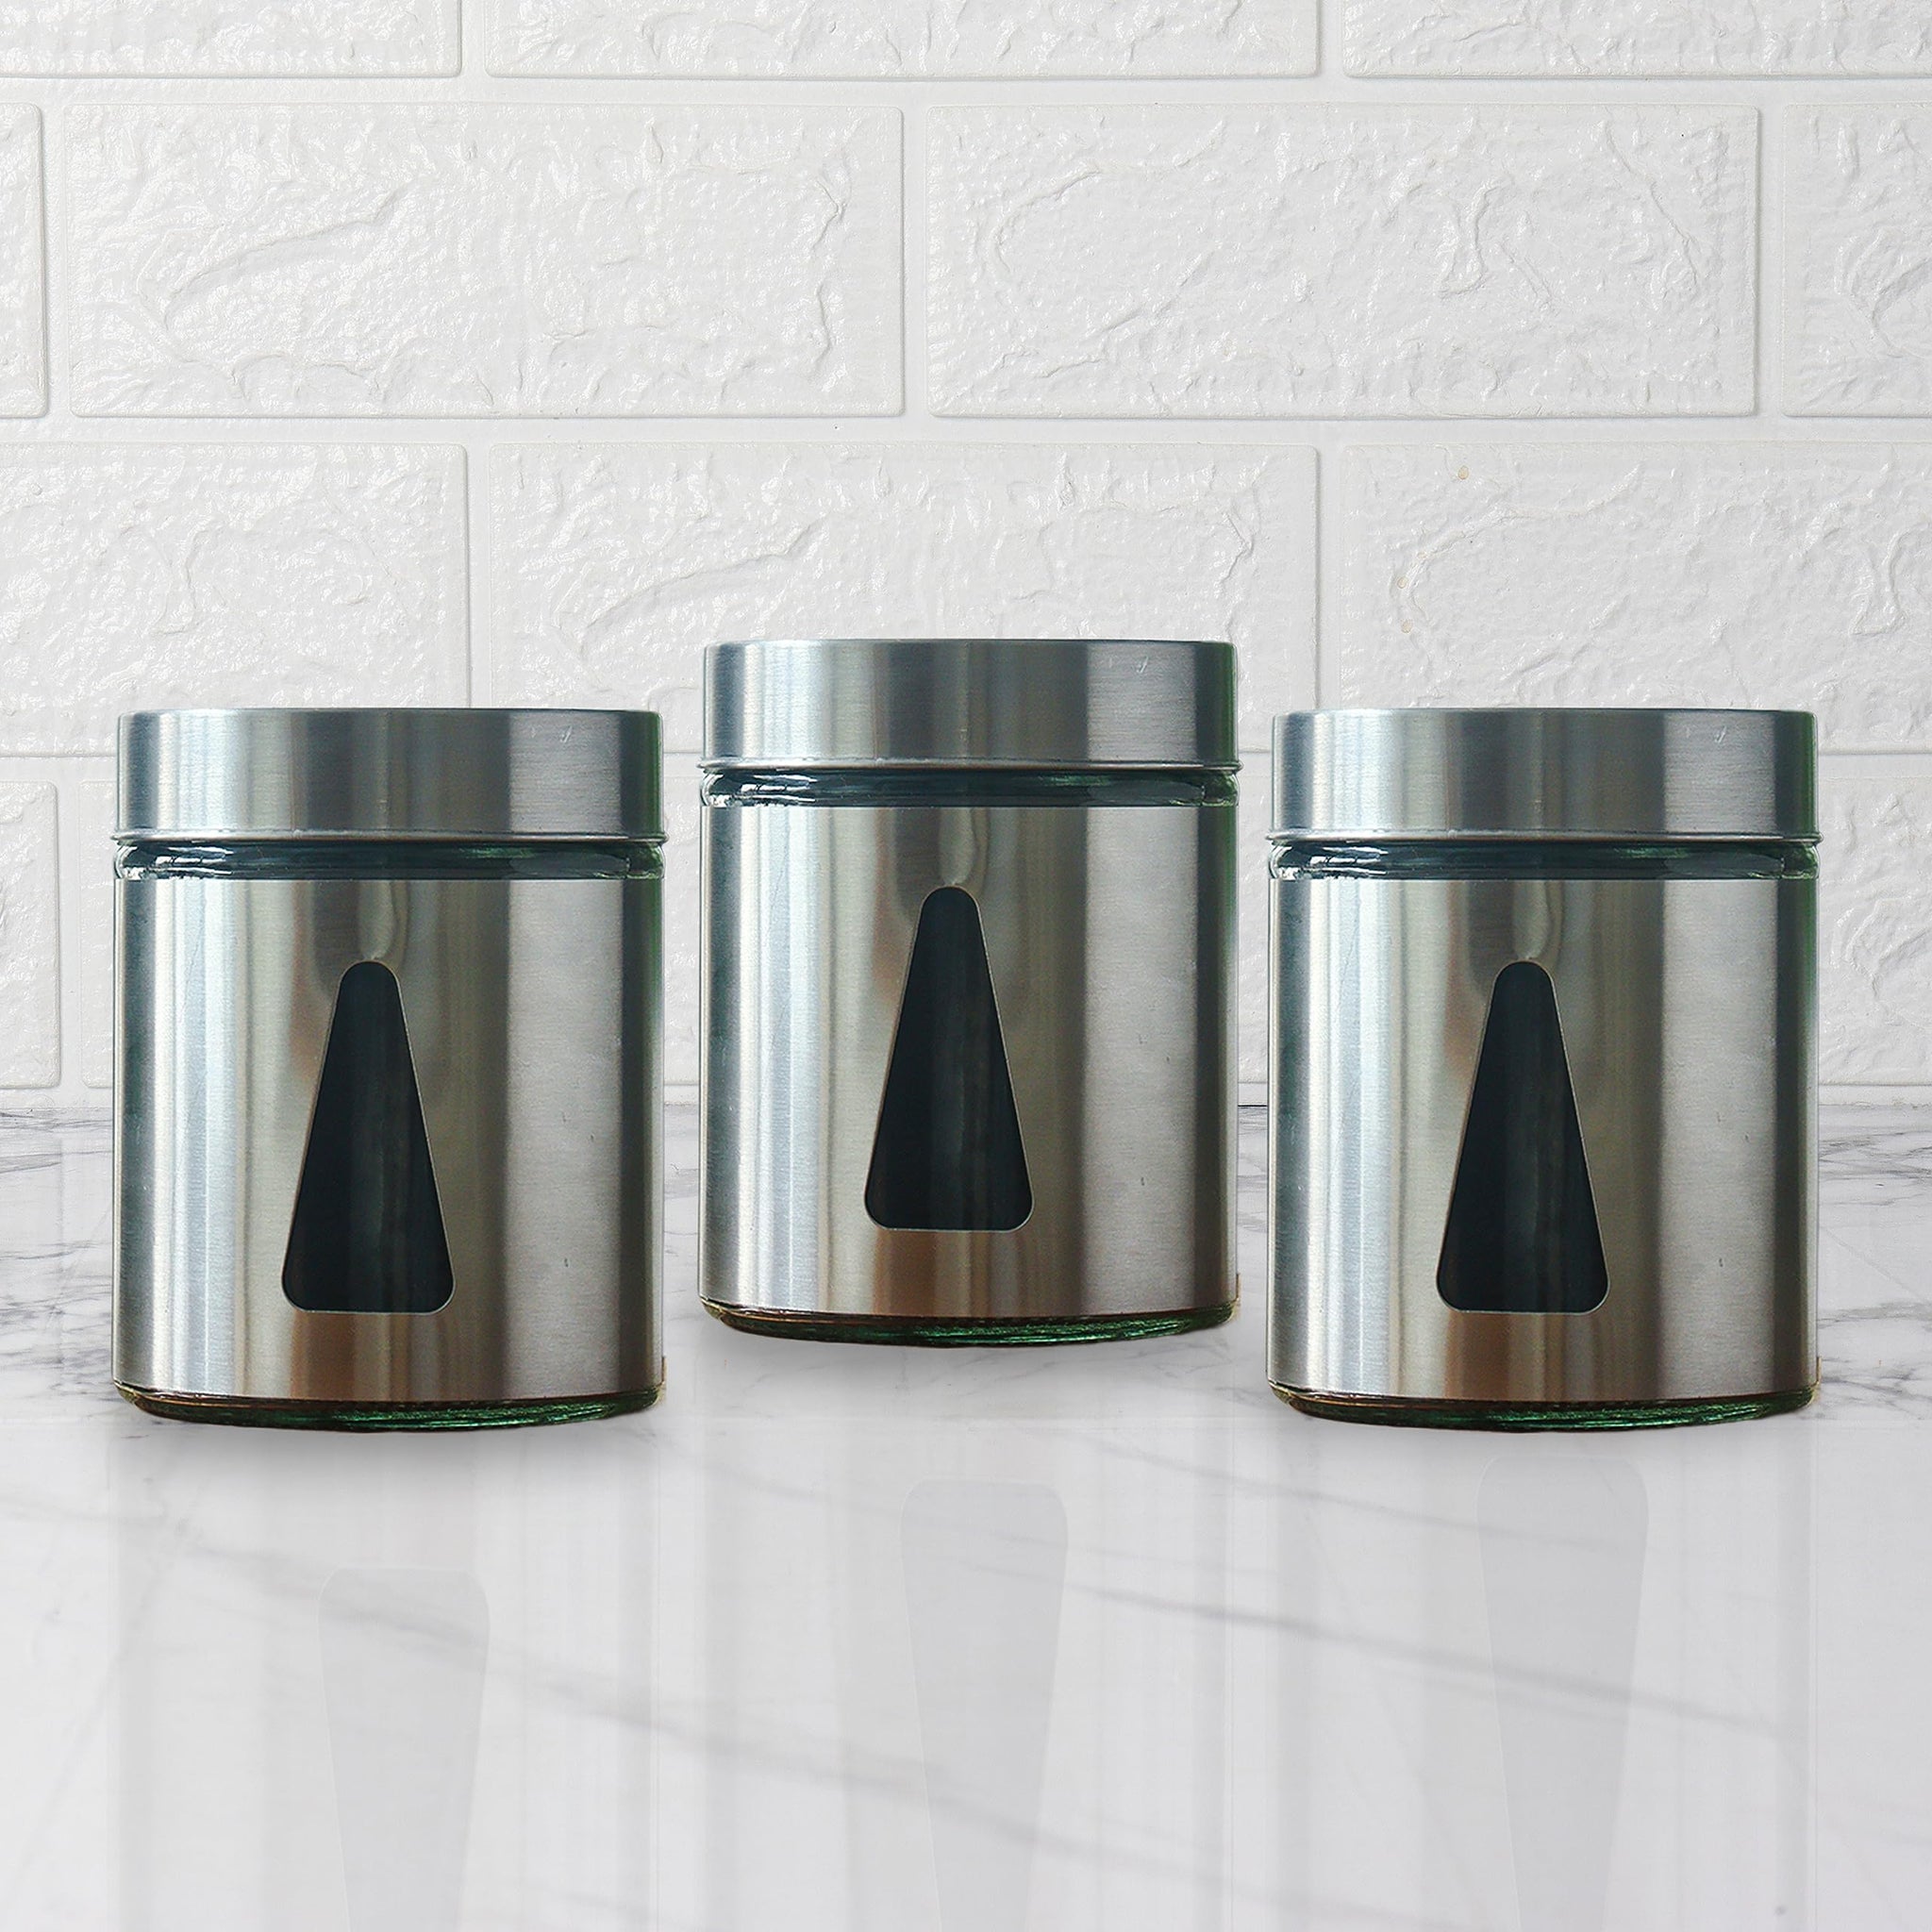 Femora Steel Jar for Kitchen Storage with Triangle Glass Window and Stainless Steel Cover, 1300 ml, Set Of 3, Free Replacement of Lids